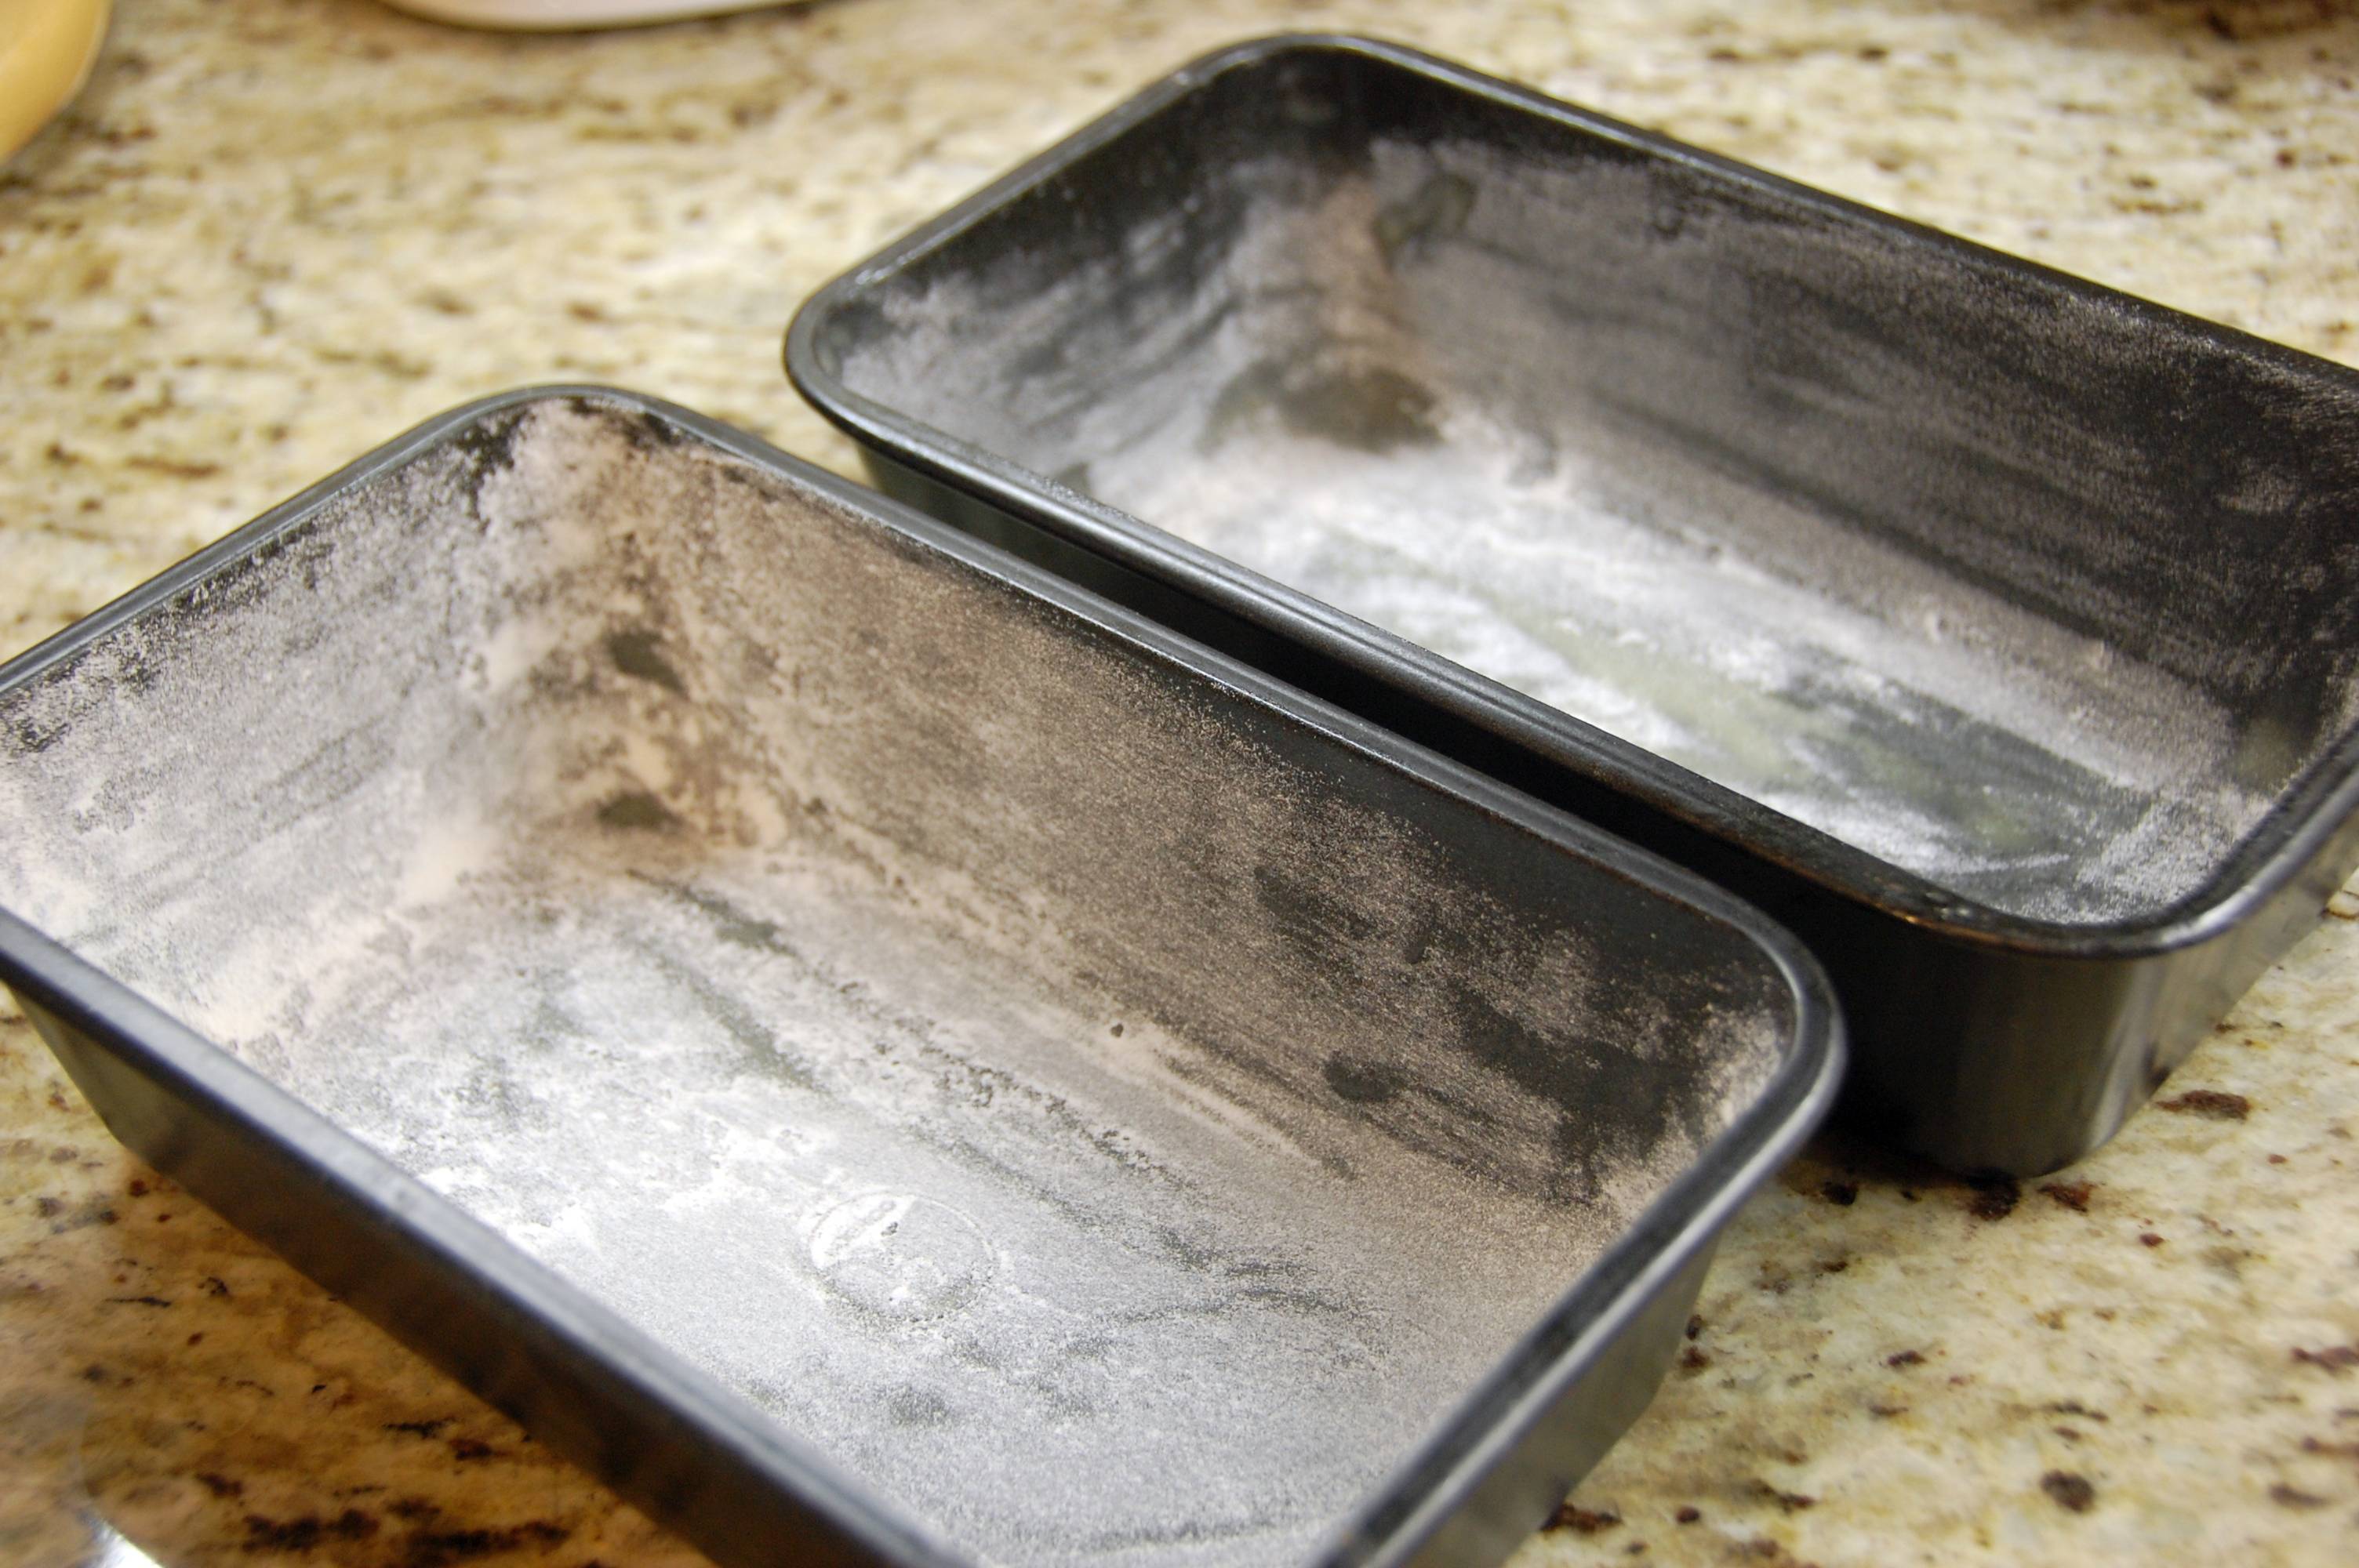 The baking trials: What's the best way to prep your cake pan to